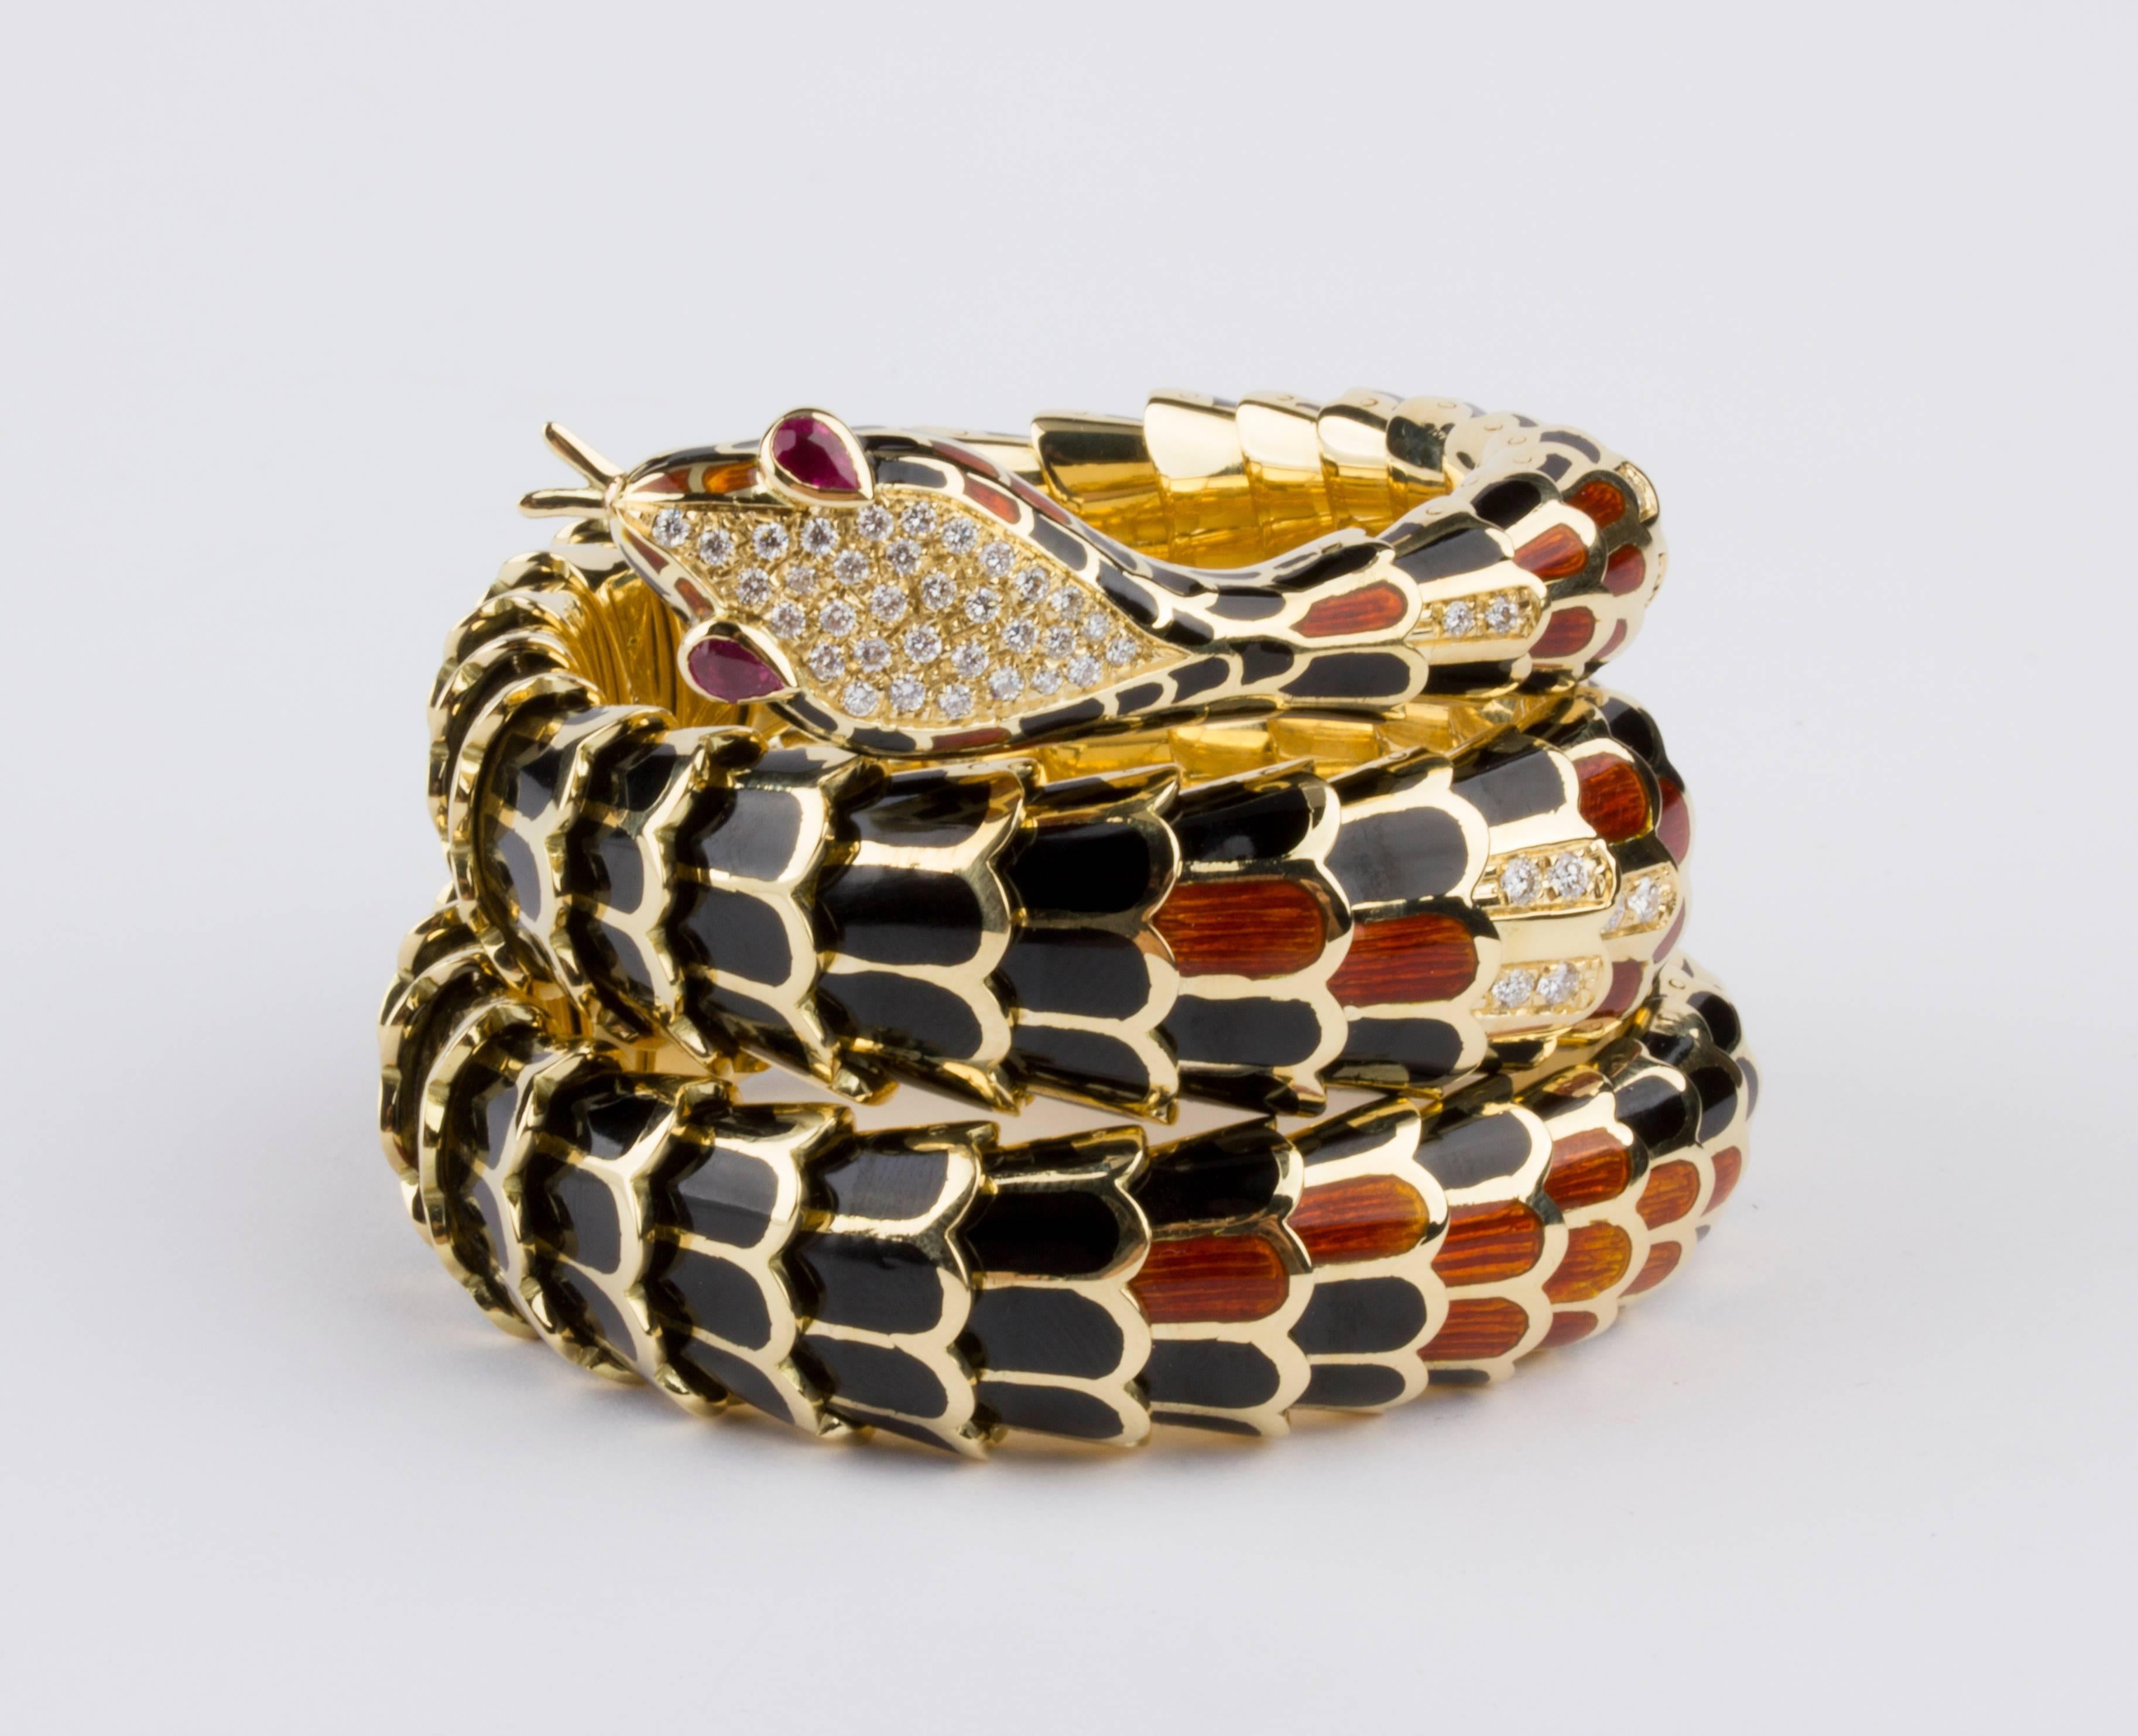 Realized in gold, shaped as a snake. The body is embellished with black and caramel colored enamels, the head and some parts of the body are covered with brilliant-cut pave diamonds, G color, VVS-VS clarity weighing 1.50 ct total. The eyes are set